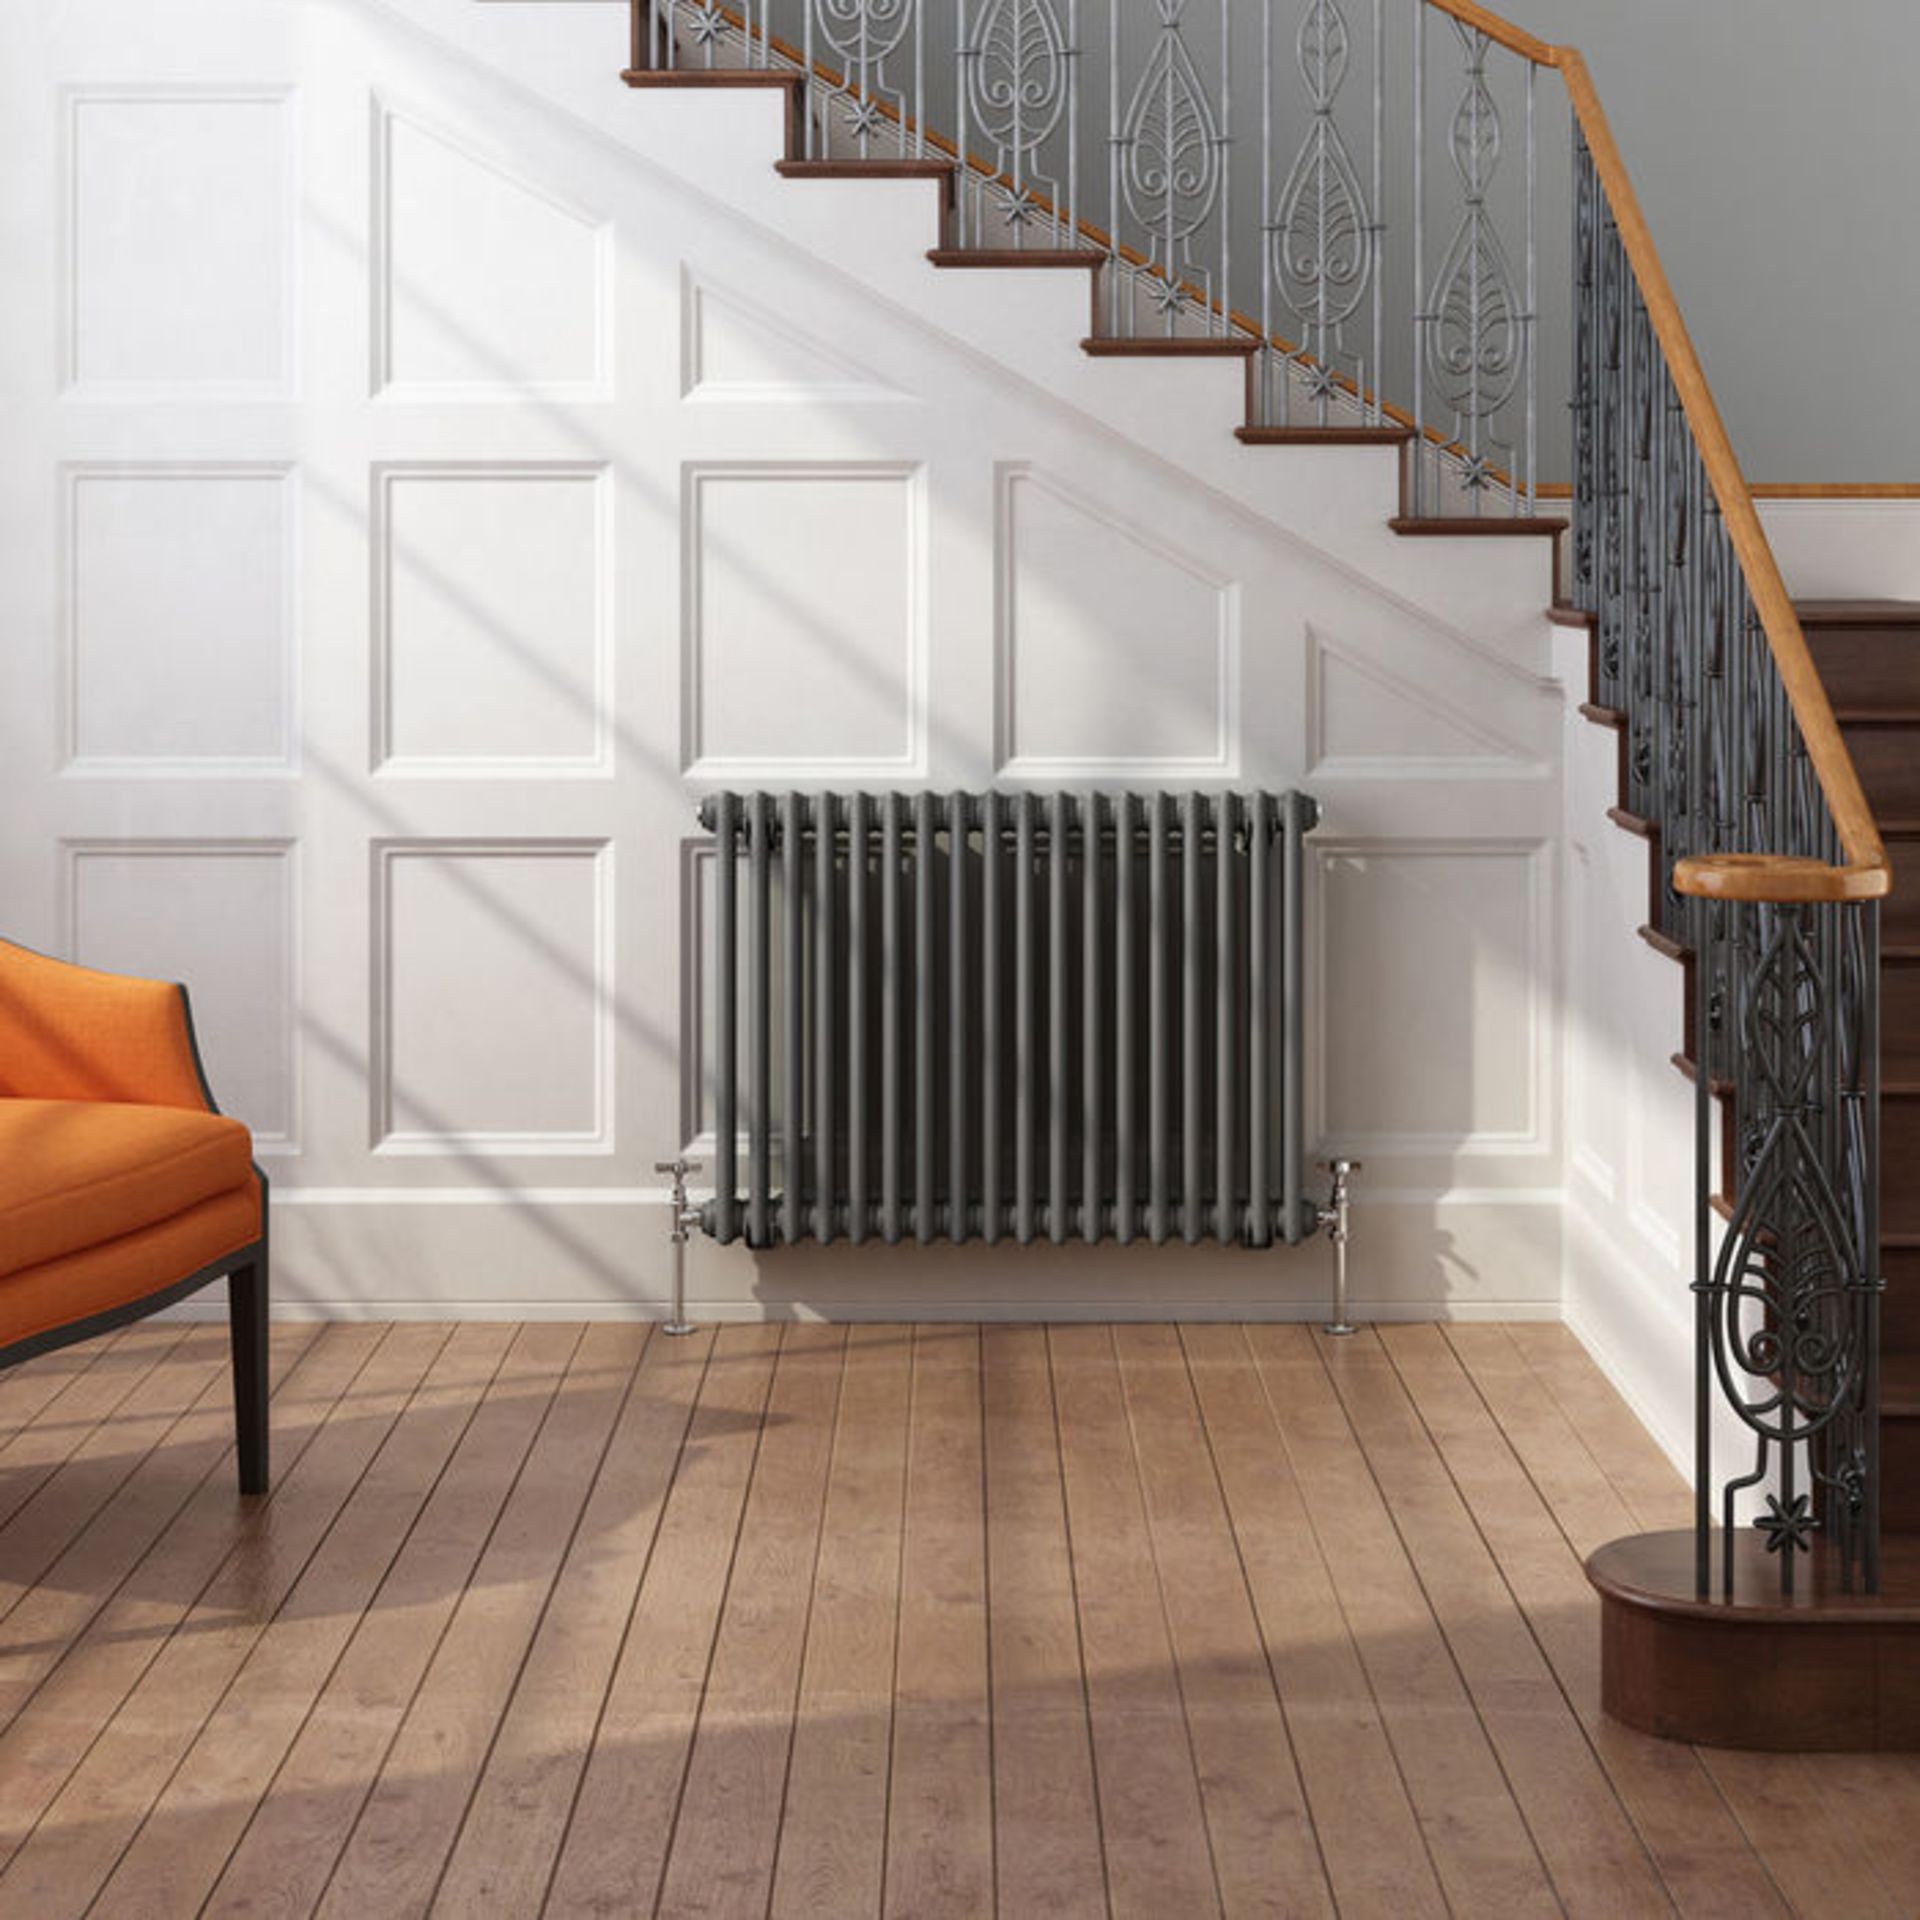 (L36) 600x828mm Anthracite Double Panel Horizontal Colosseum Traditional Radiator. RRP £447.99. - Image 2 of 3